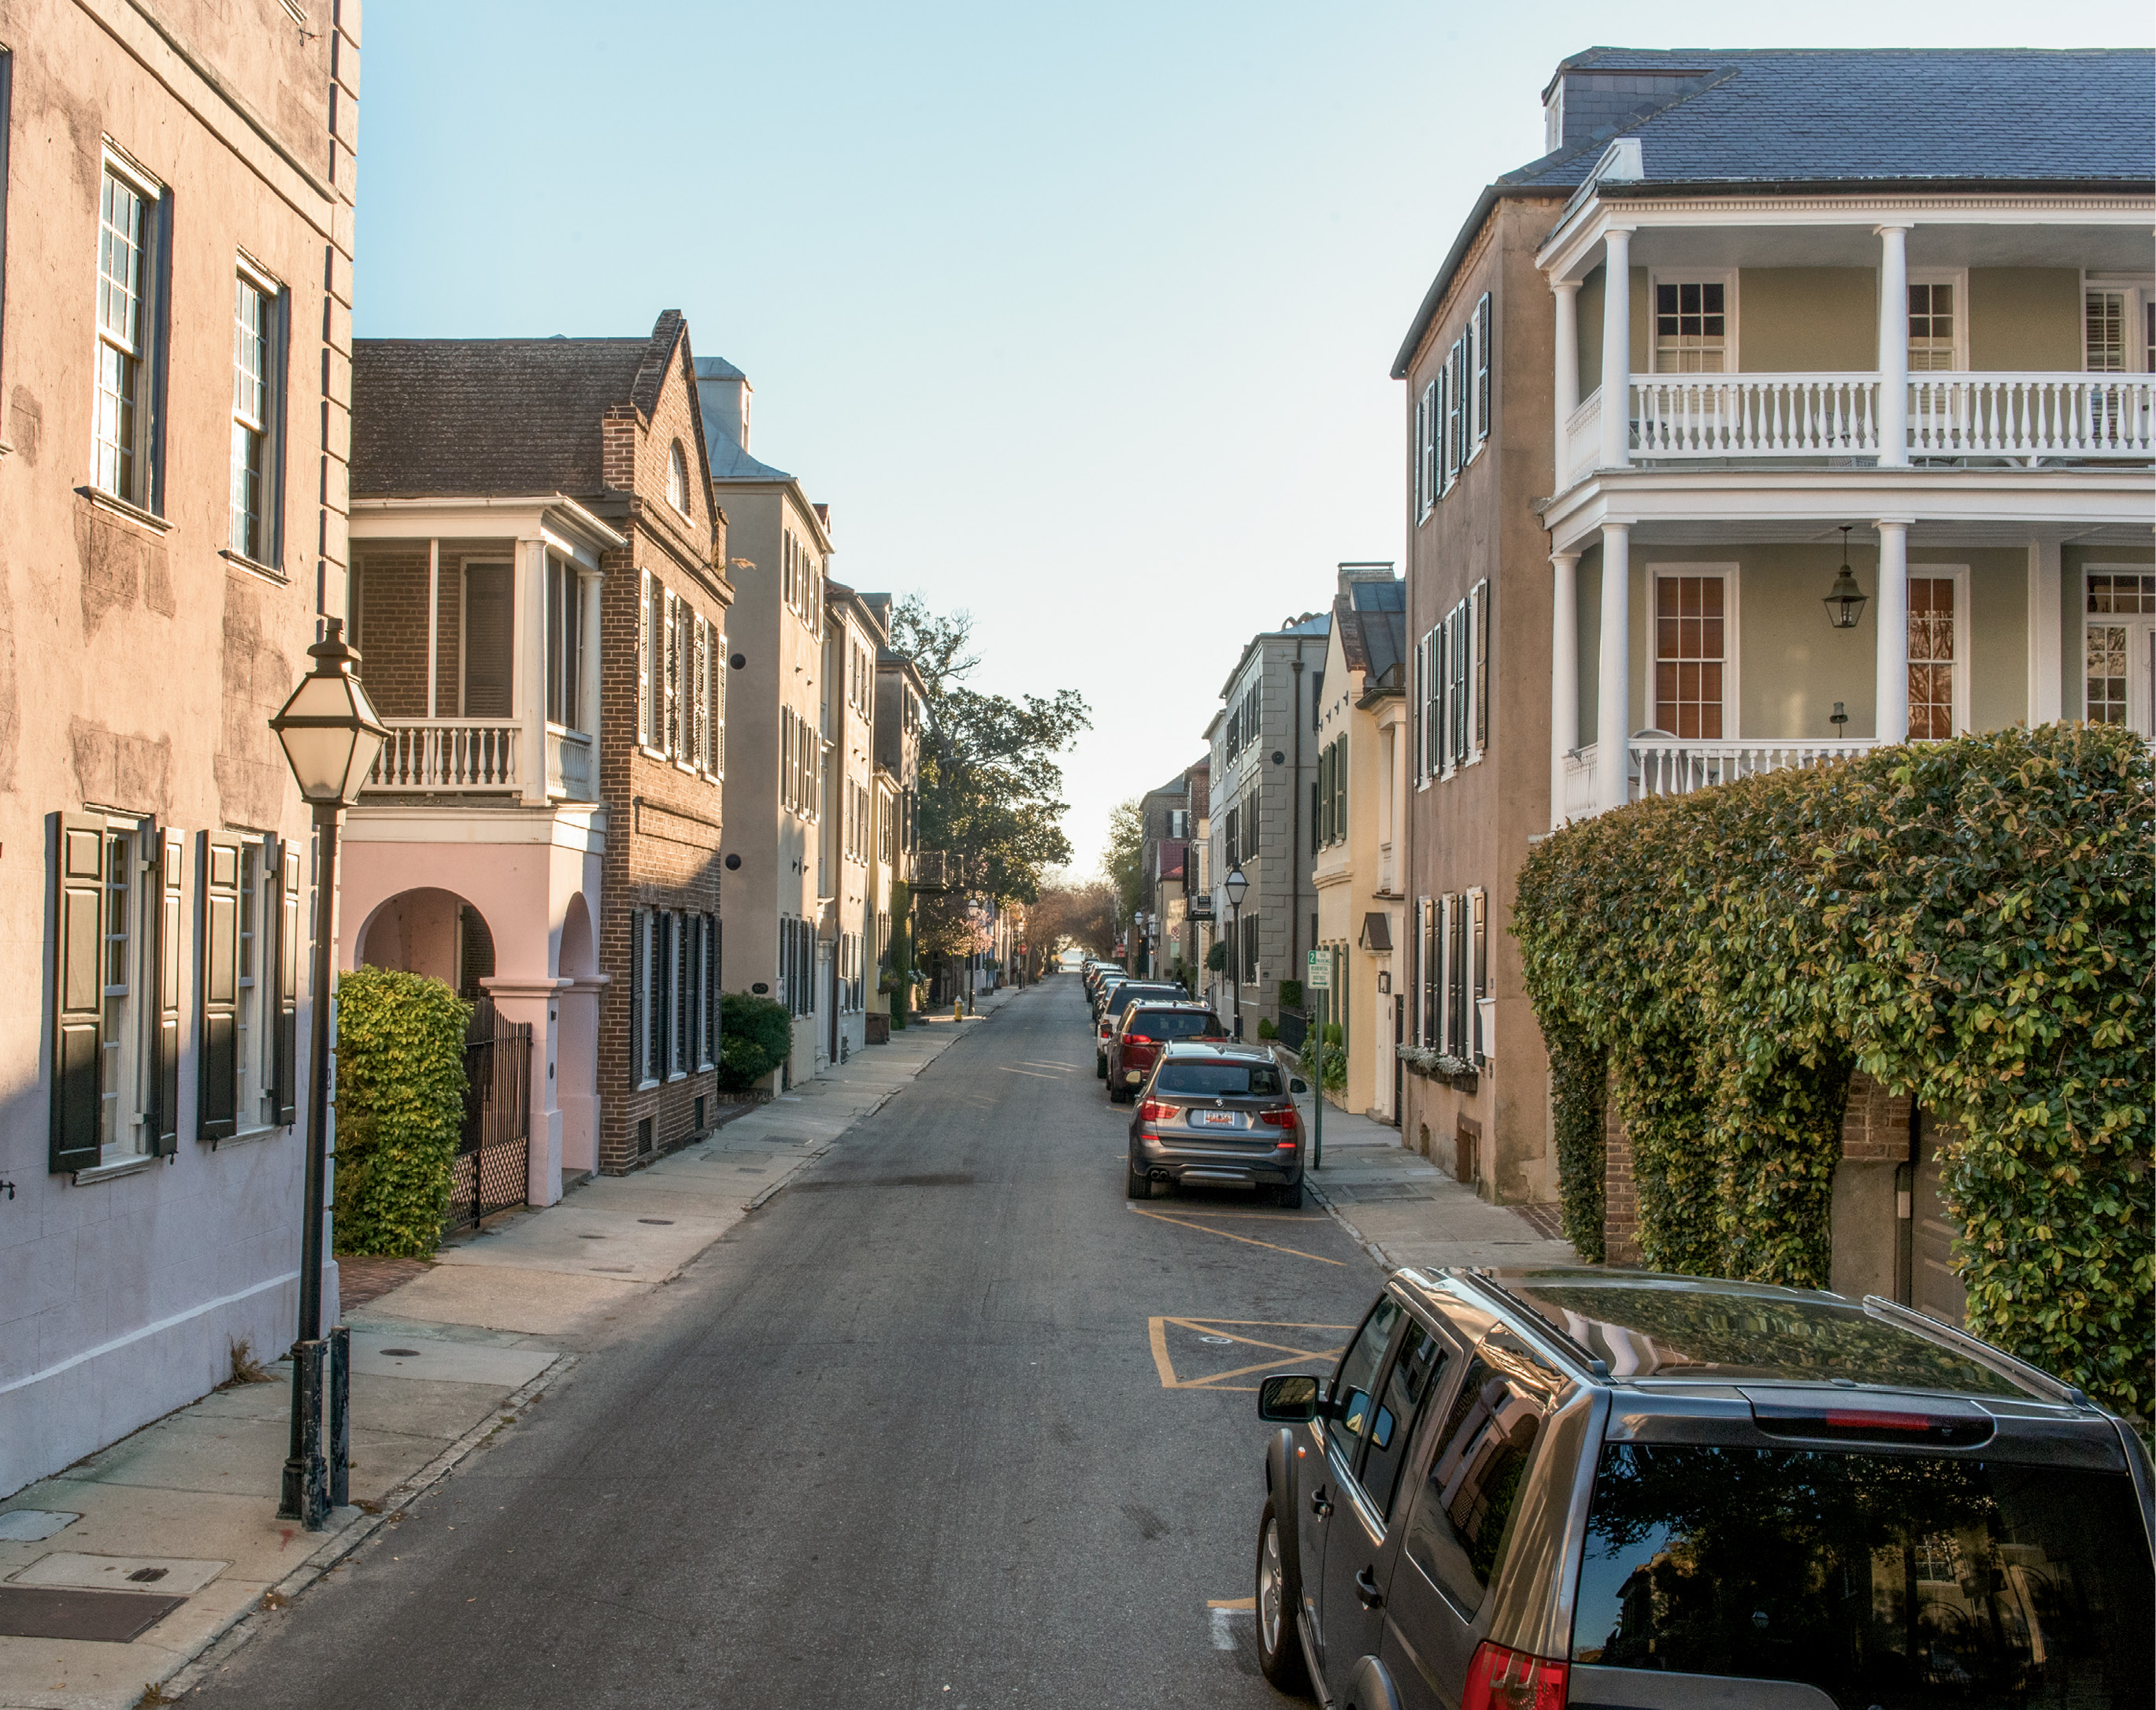 “The restoration movement of the 1920s... centered on the earliest streets such as Tradd and East Bay, where individuals such as Susan Pringle Frost personally purchased homes and resold them to restoration-minded people.” —Jonathan H. Poston, The Buildings of Charleston